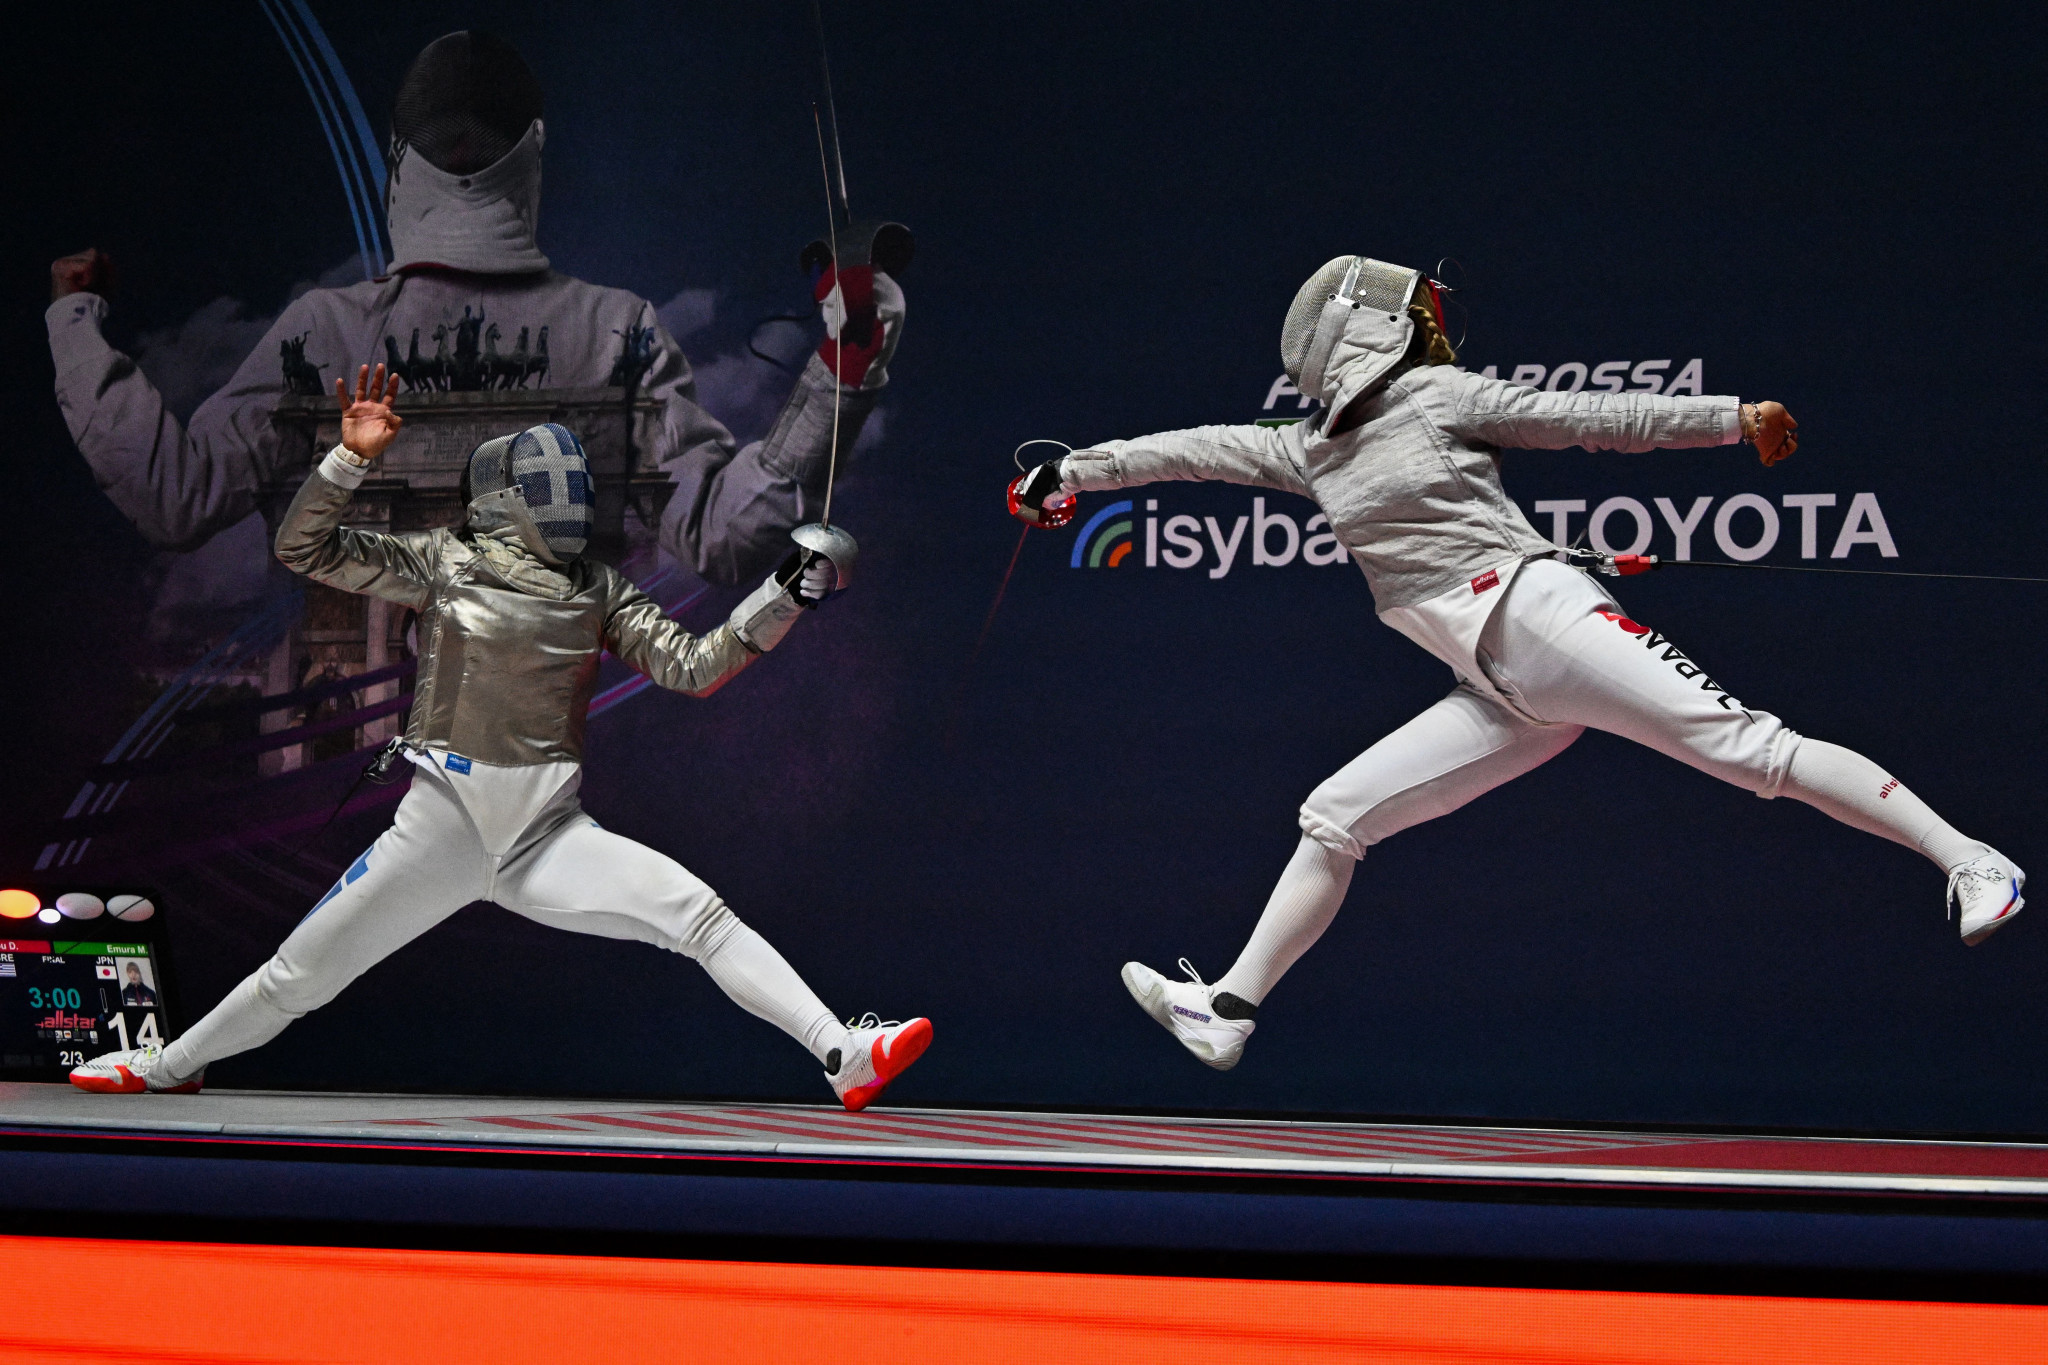 Misaki Emura of Japan, right, defended her women's sabre title at the FIE Fencing World Championships with victory against Greece's Despina Georgiadou, left ©Getty Images